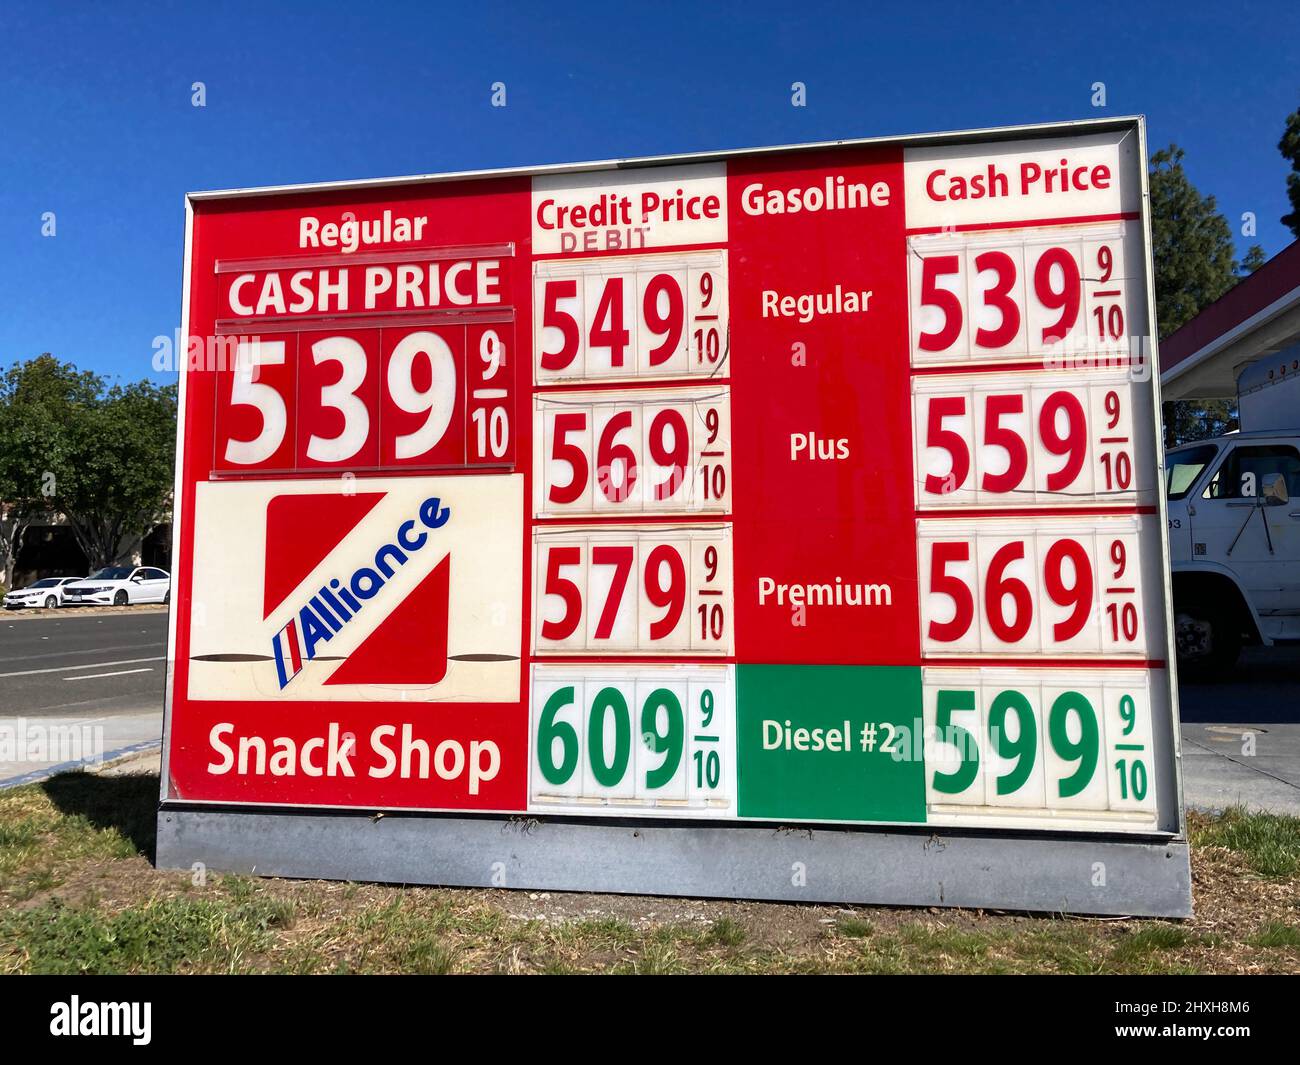 Gas station price sign. The average gasoline price in California exceeded 5 dollars per gallon - San Jose, California, USA - March 11, 2022 Stock Photo